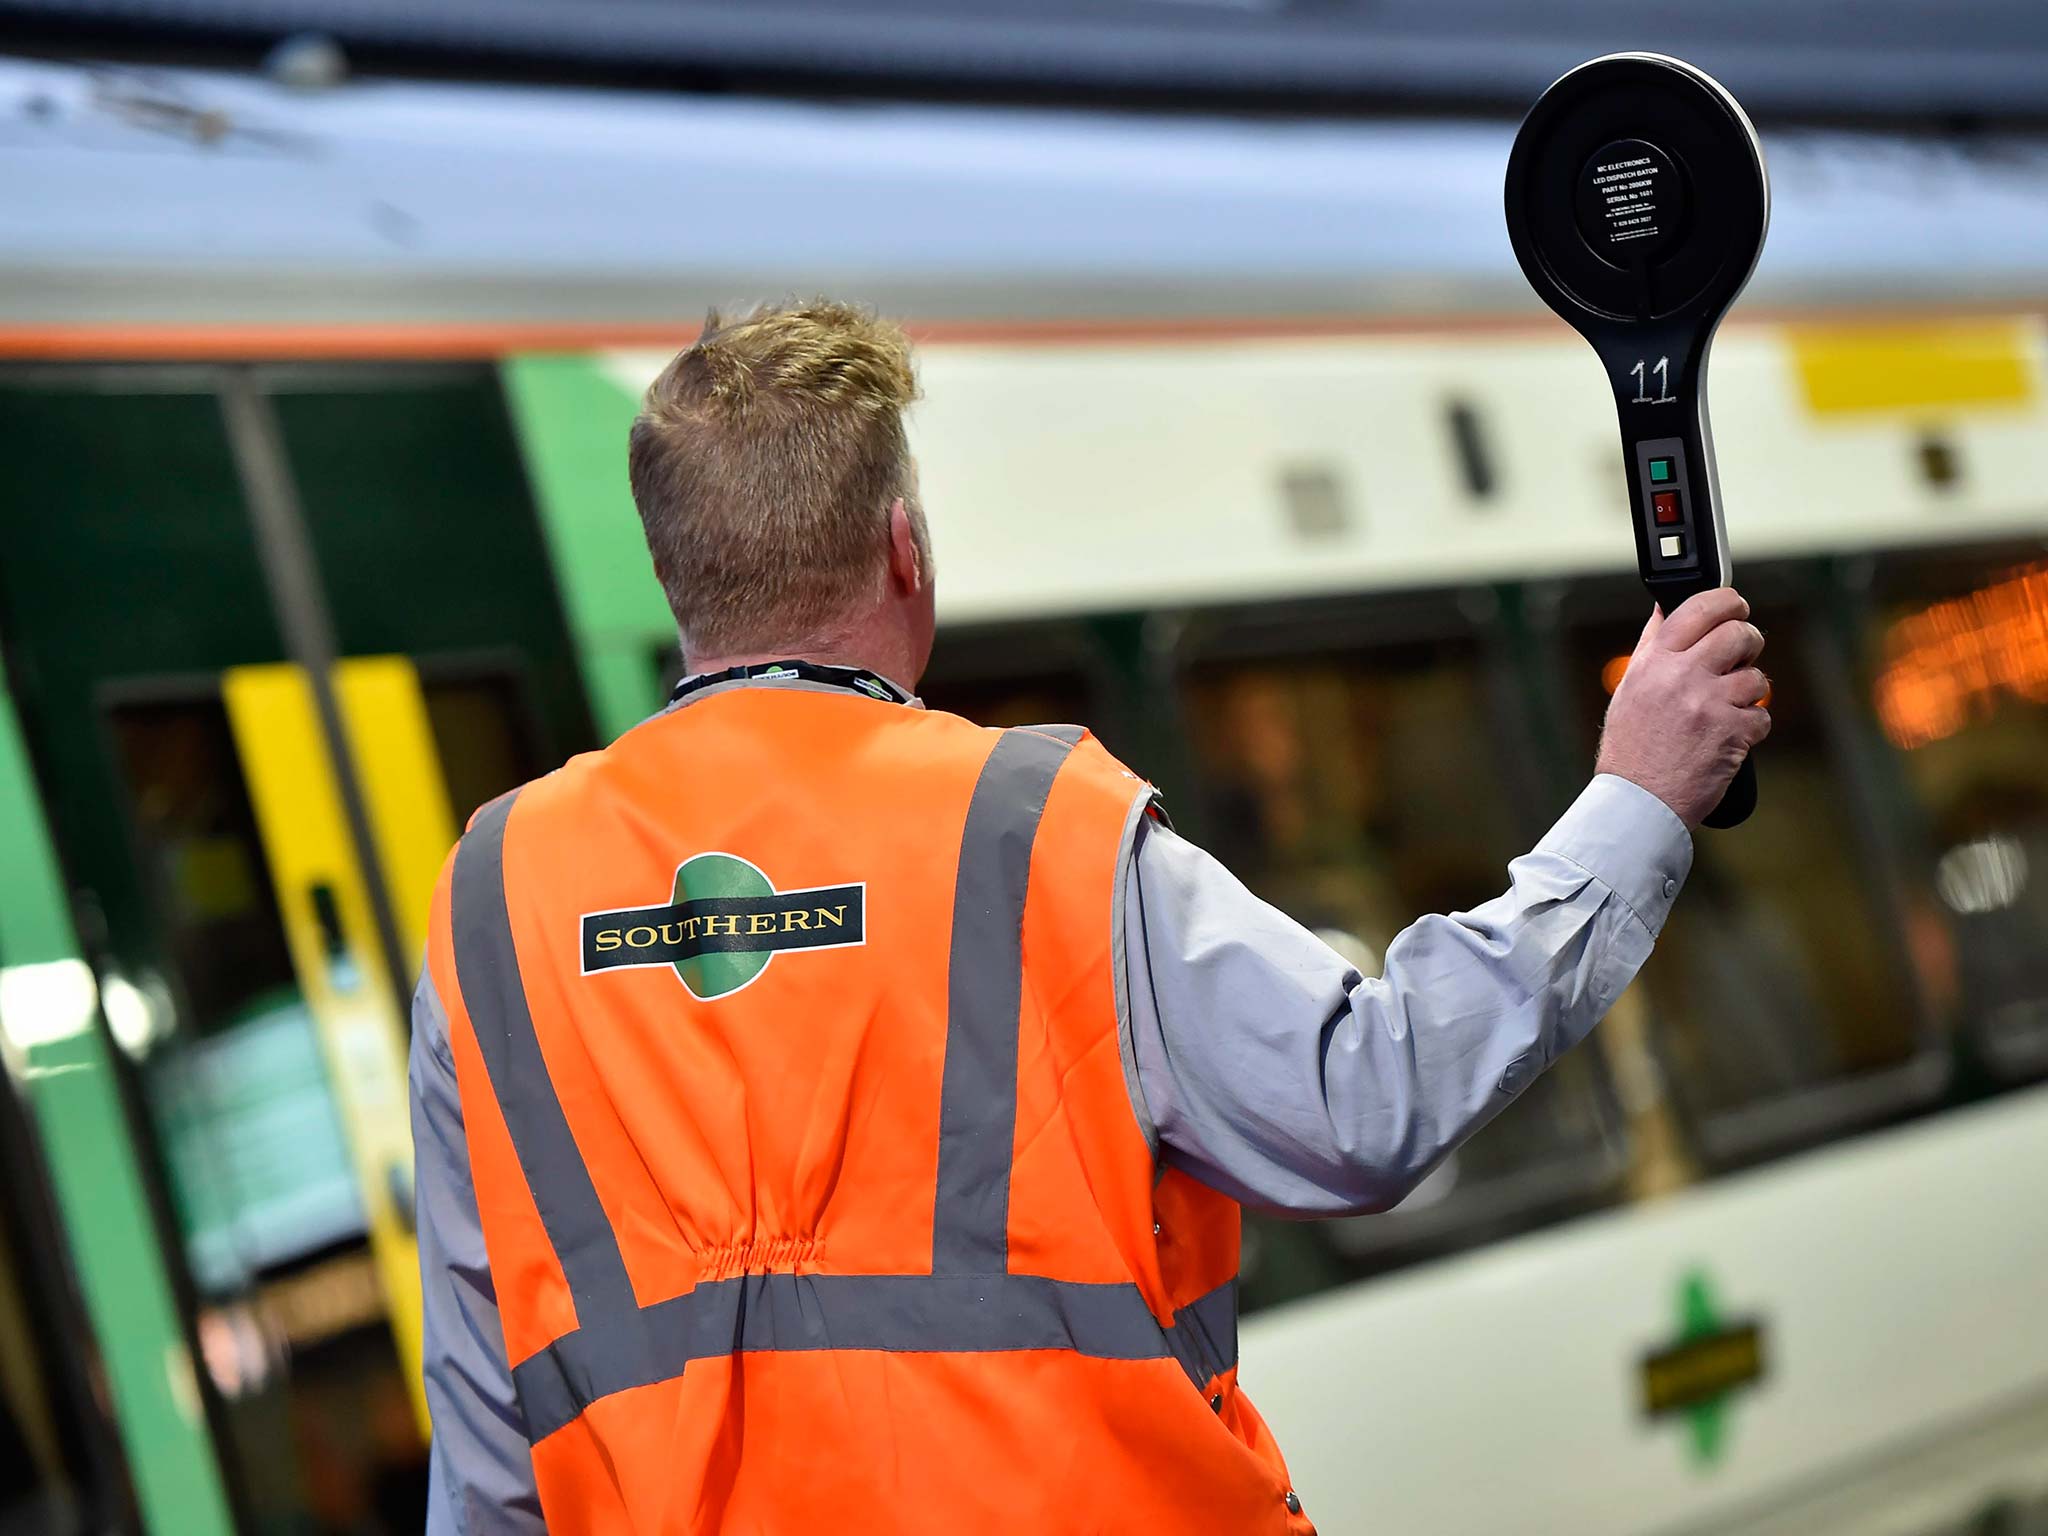 Earlier this year passengers voted Southern as Britain’s worst train company in the National Rail Passenger Survey